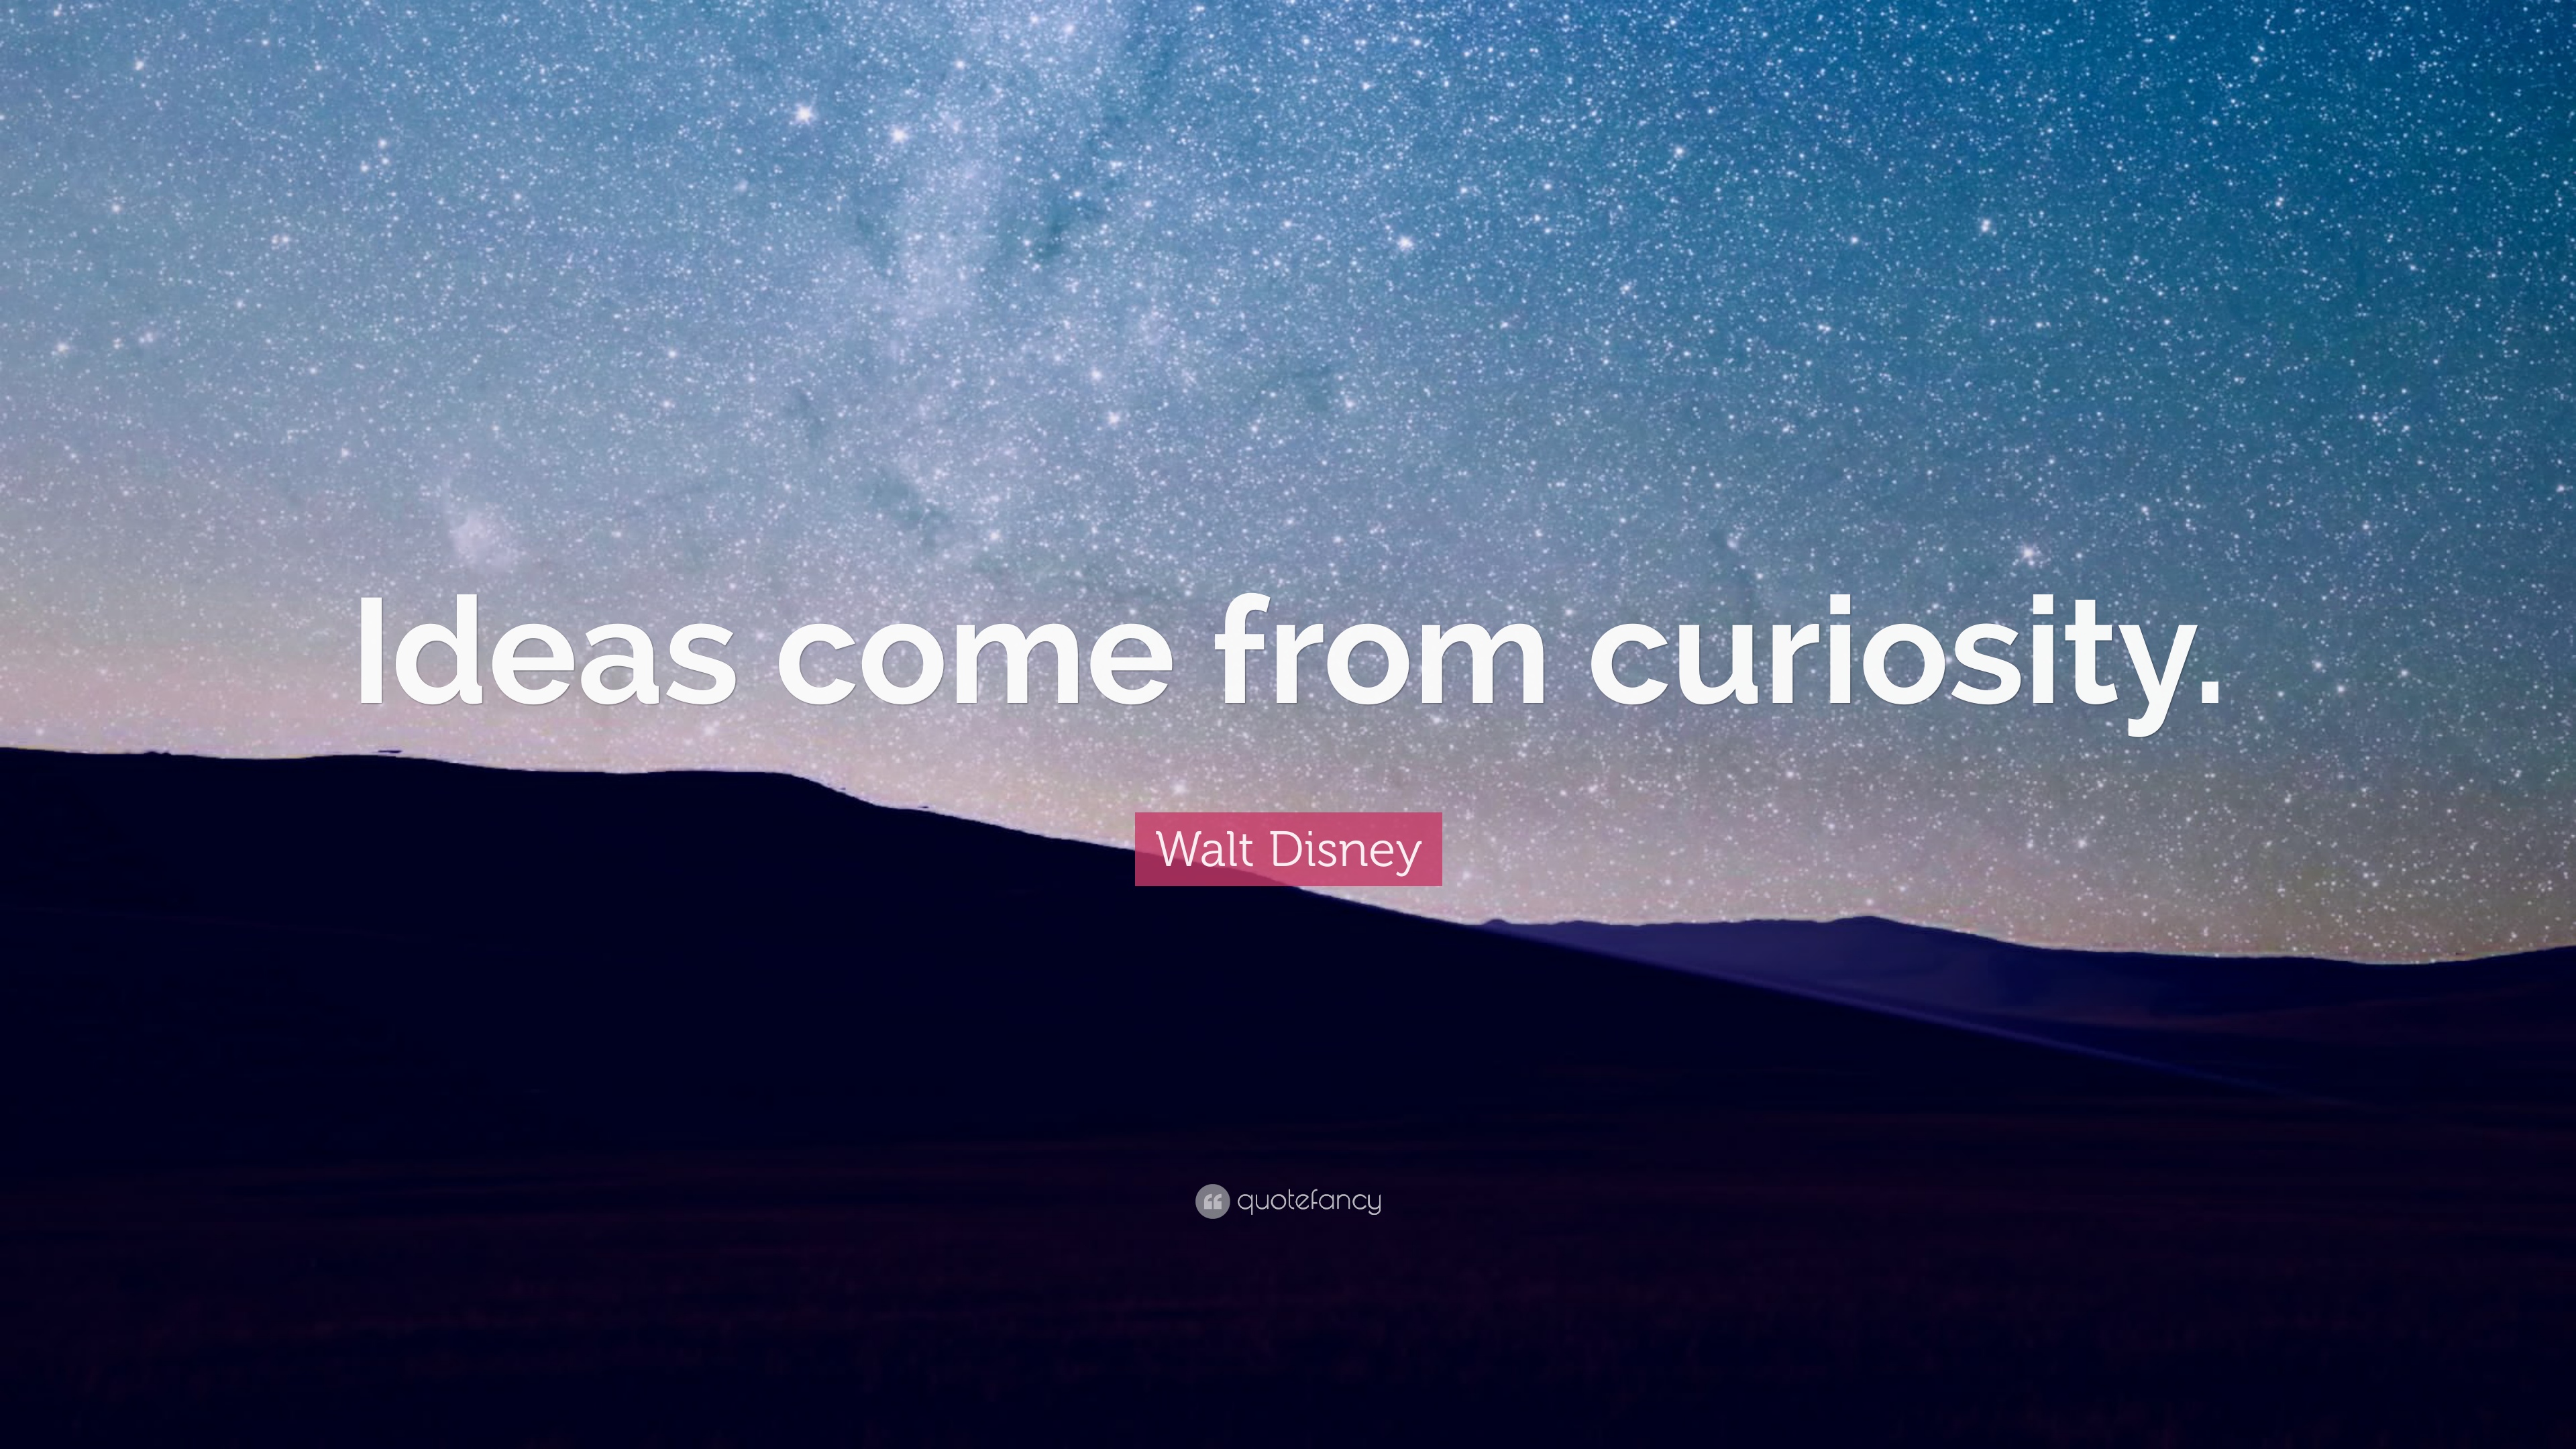 Walt Disney Quote: “Ideas come from curiosity.” 12 wallpaper